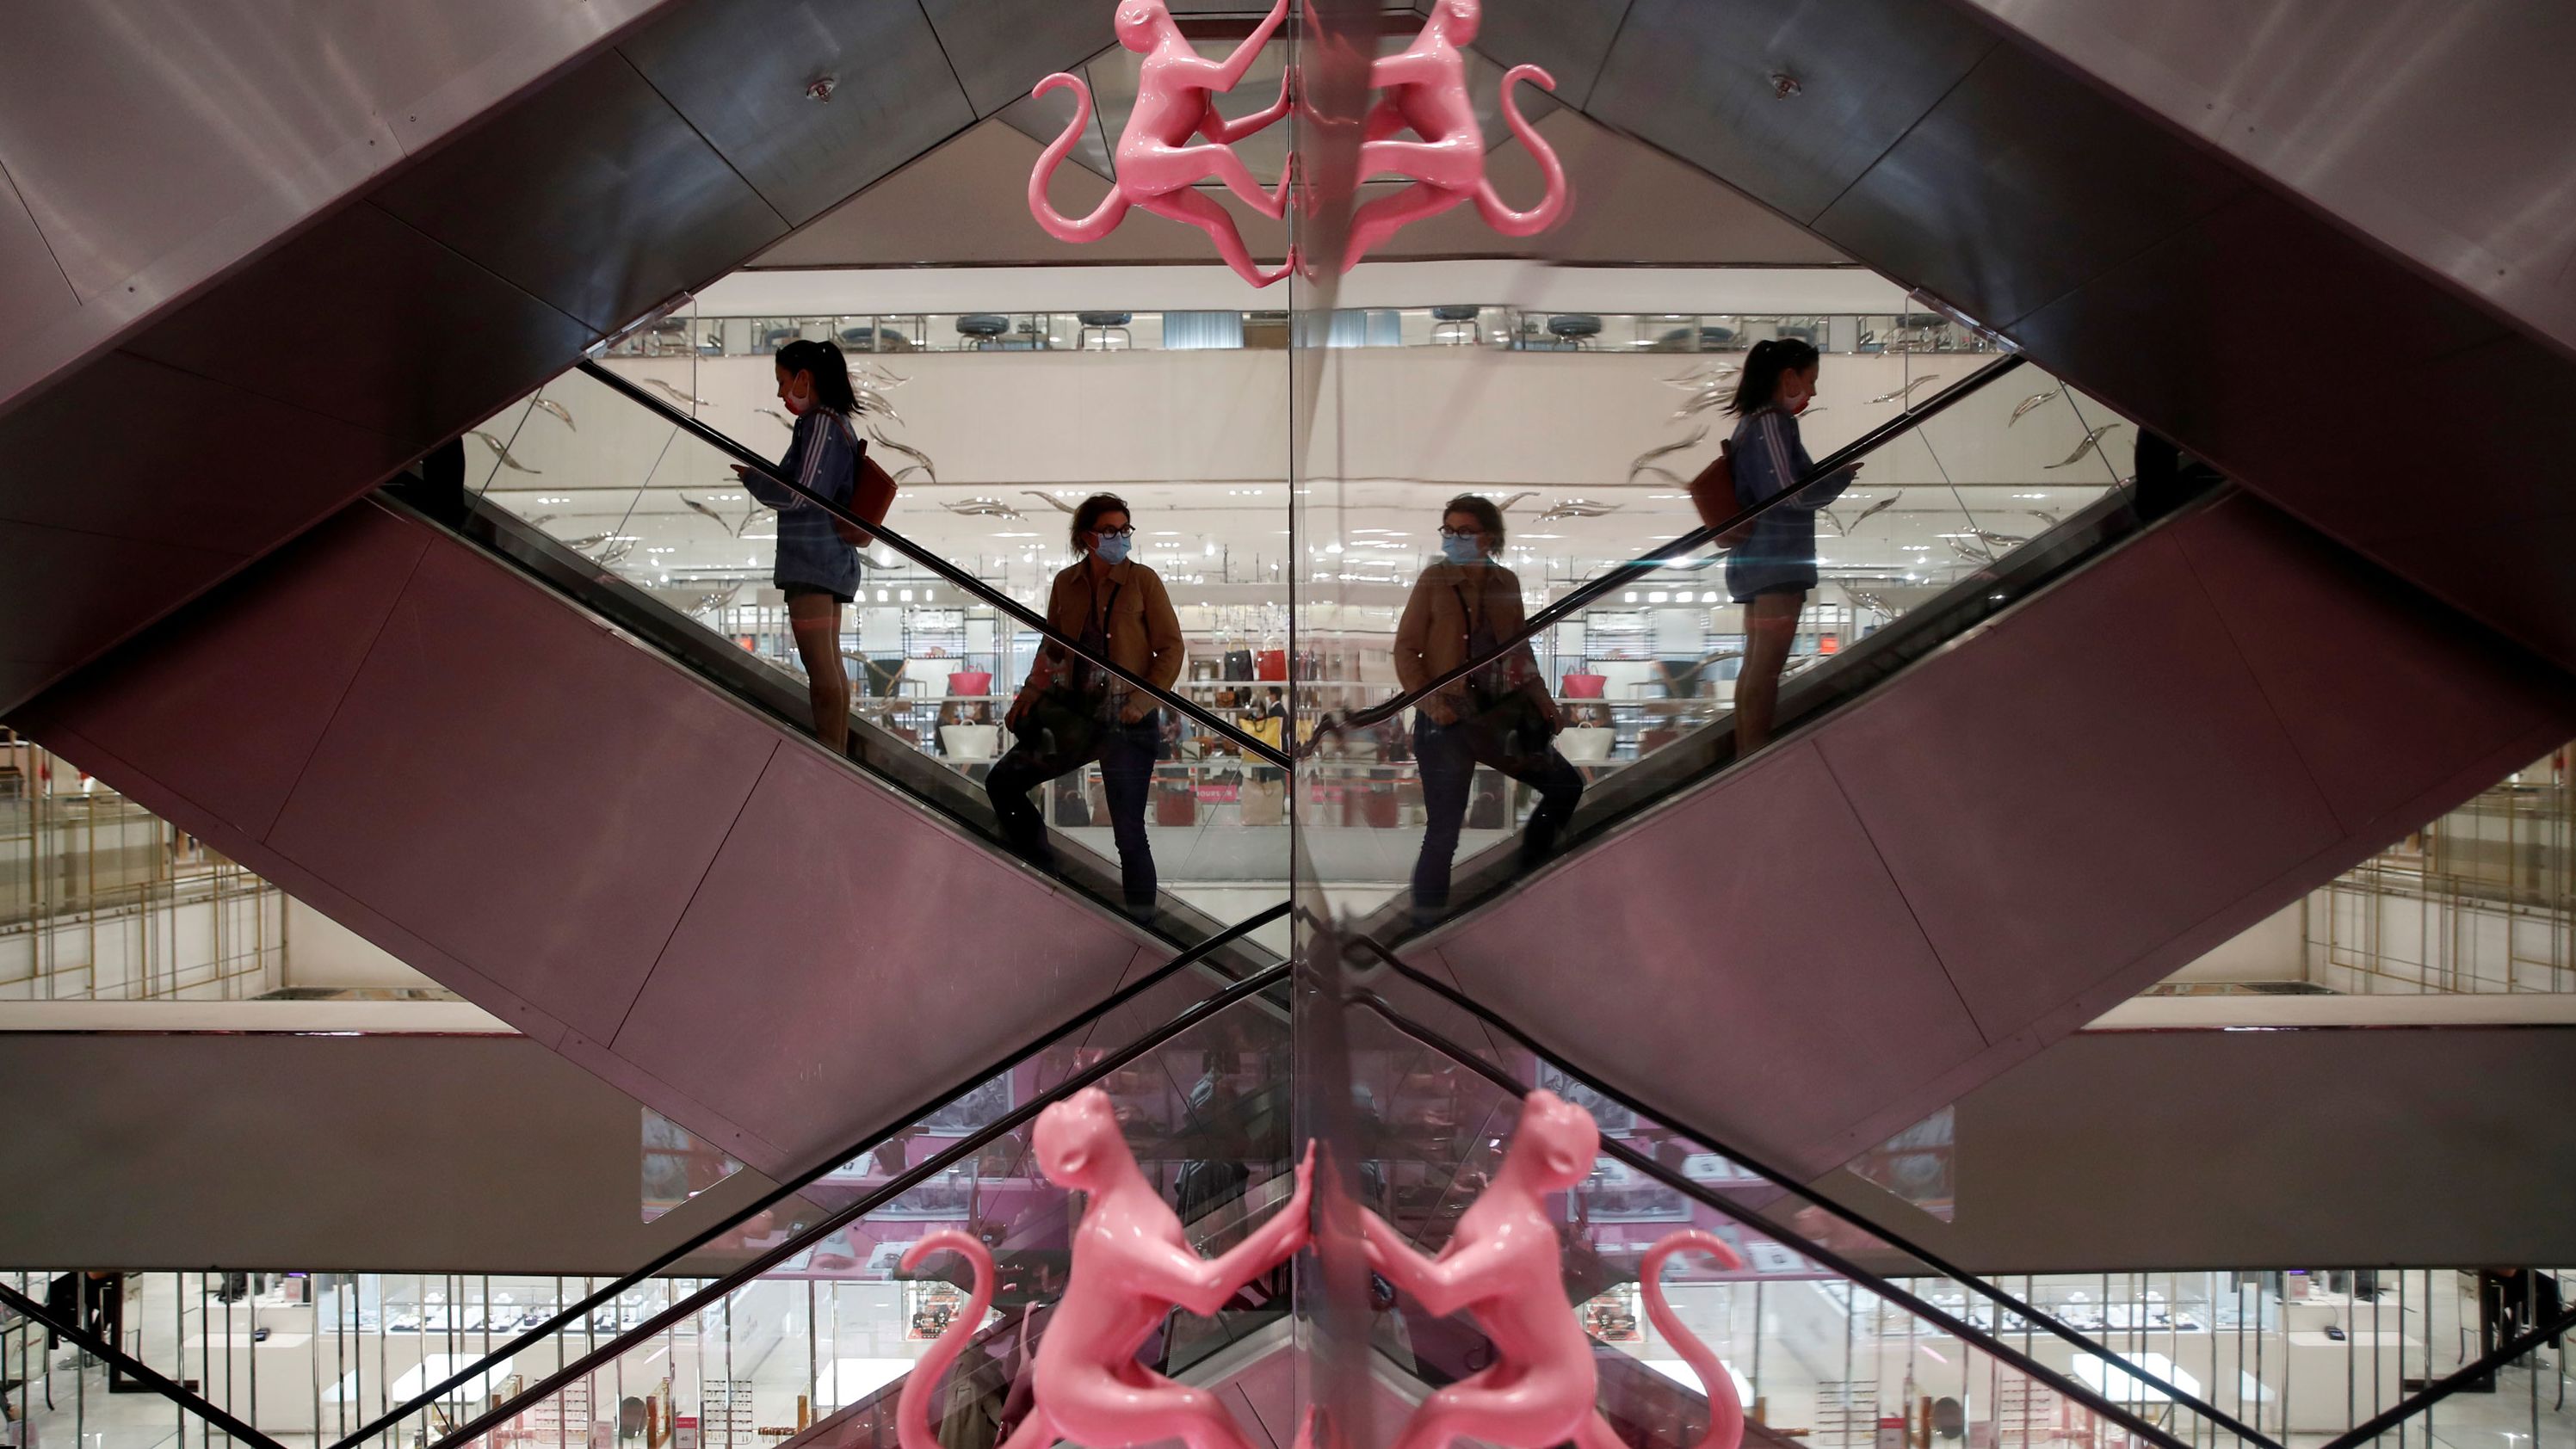 Customers stand on an escalator inside Le Printemps Haussmann, a department store in Paris, on May 28.